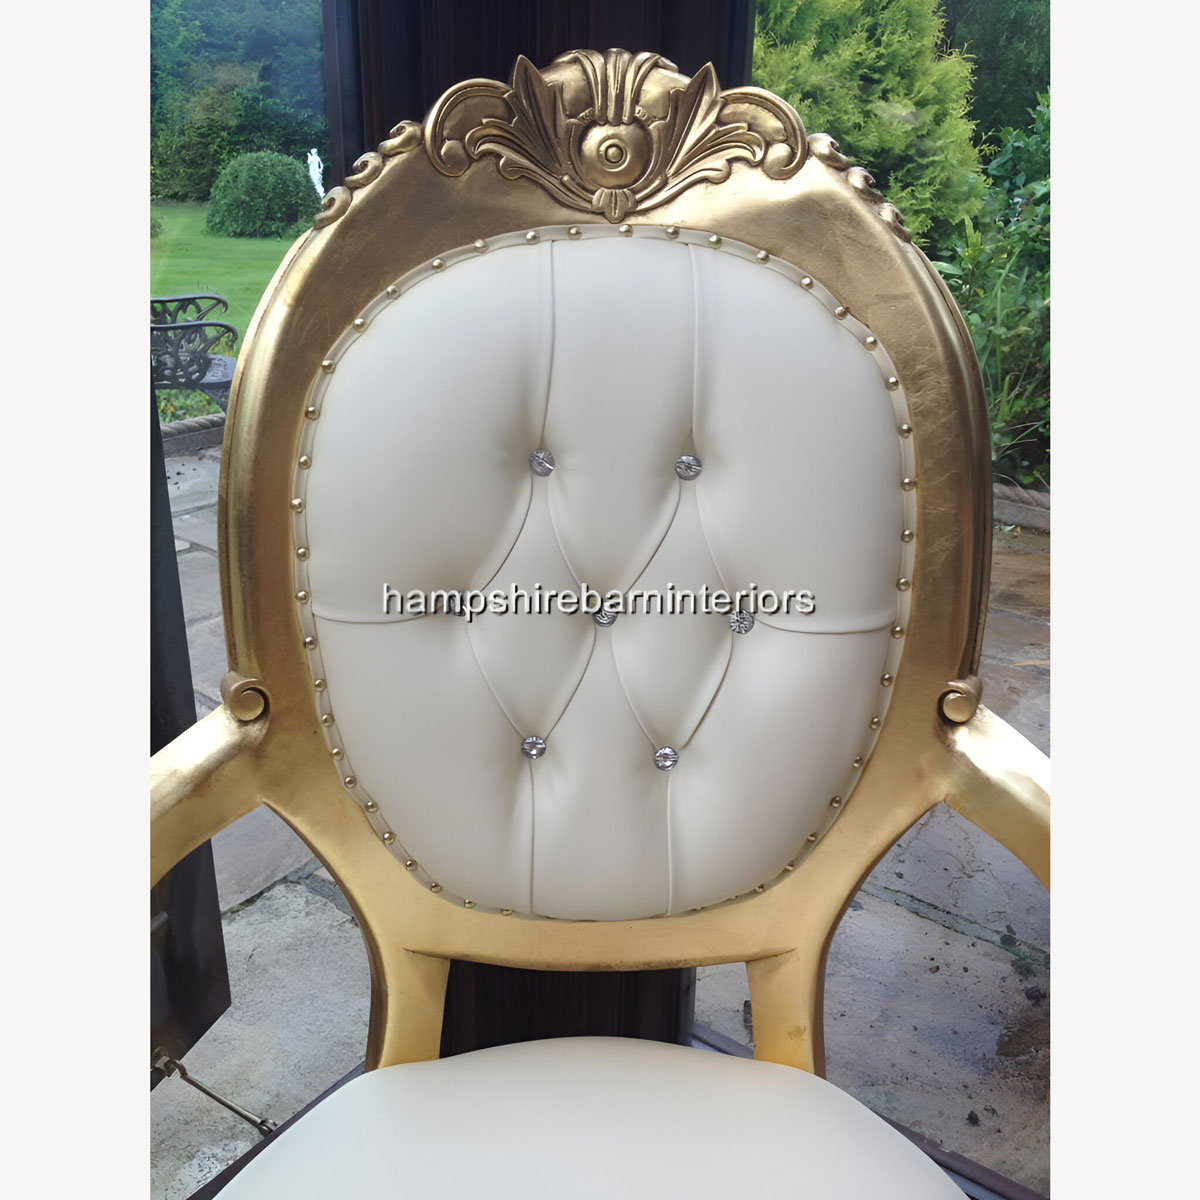 Chatsworth Chair In Gold Leaf And Cream Faux Leather Now With Diamond Crystal Buttons 3 - Hampshire Barn Interiors - Chatsworth Chair In Gold Leaf And Cream Faux Leather Now With Diamond Crystal Buttons -